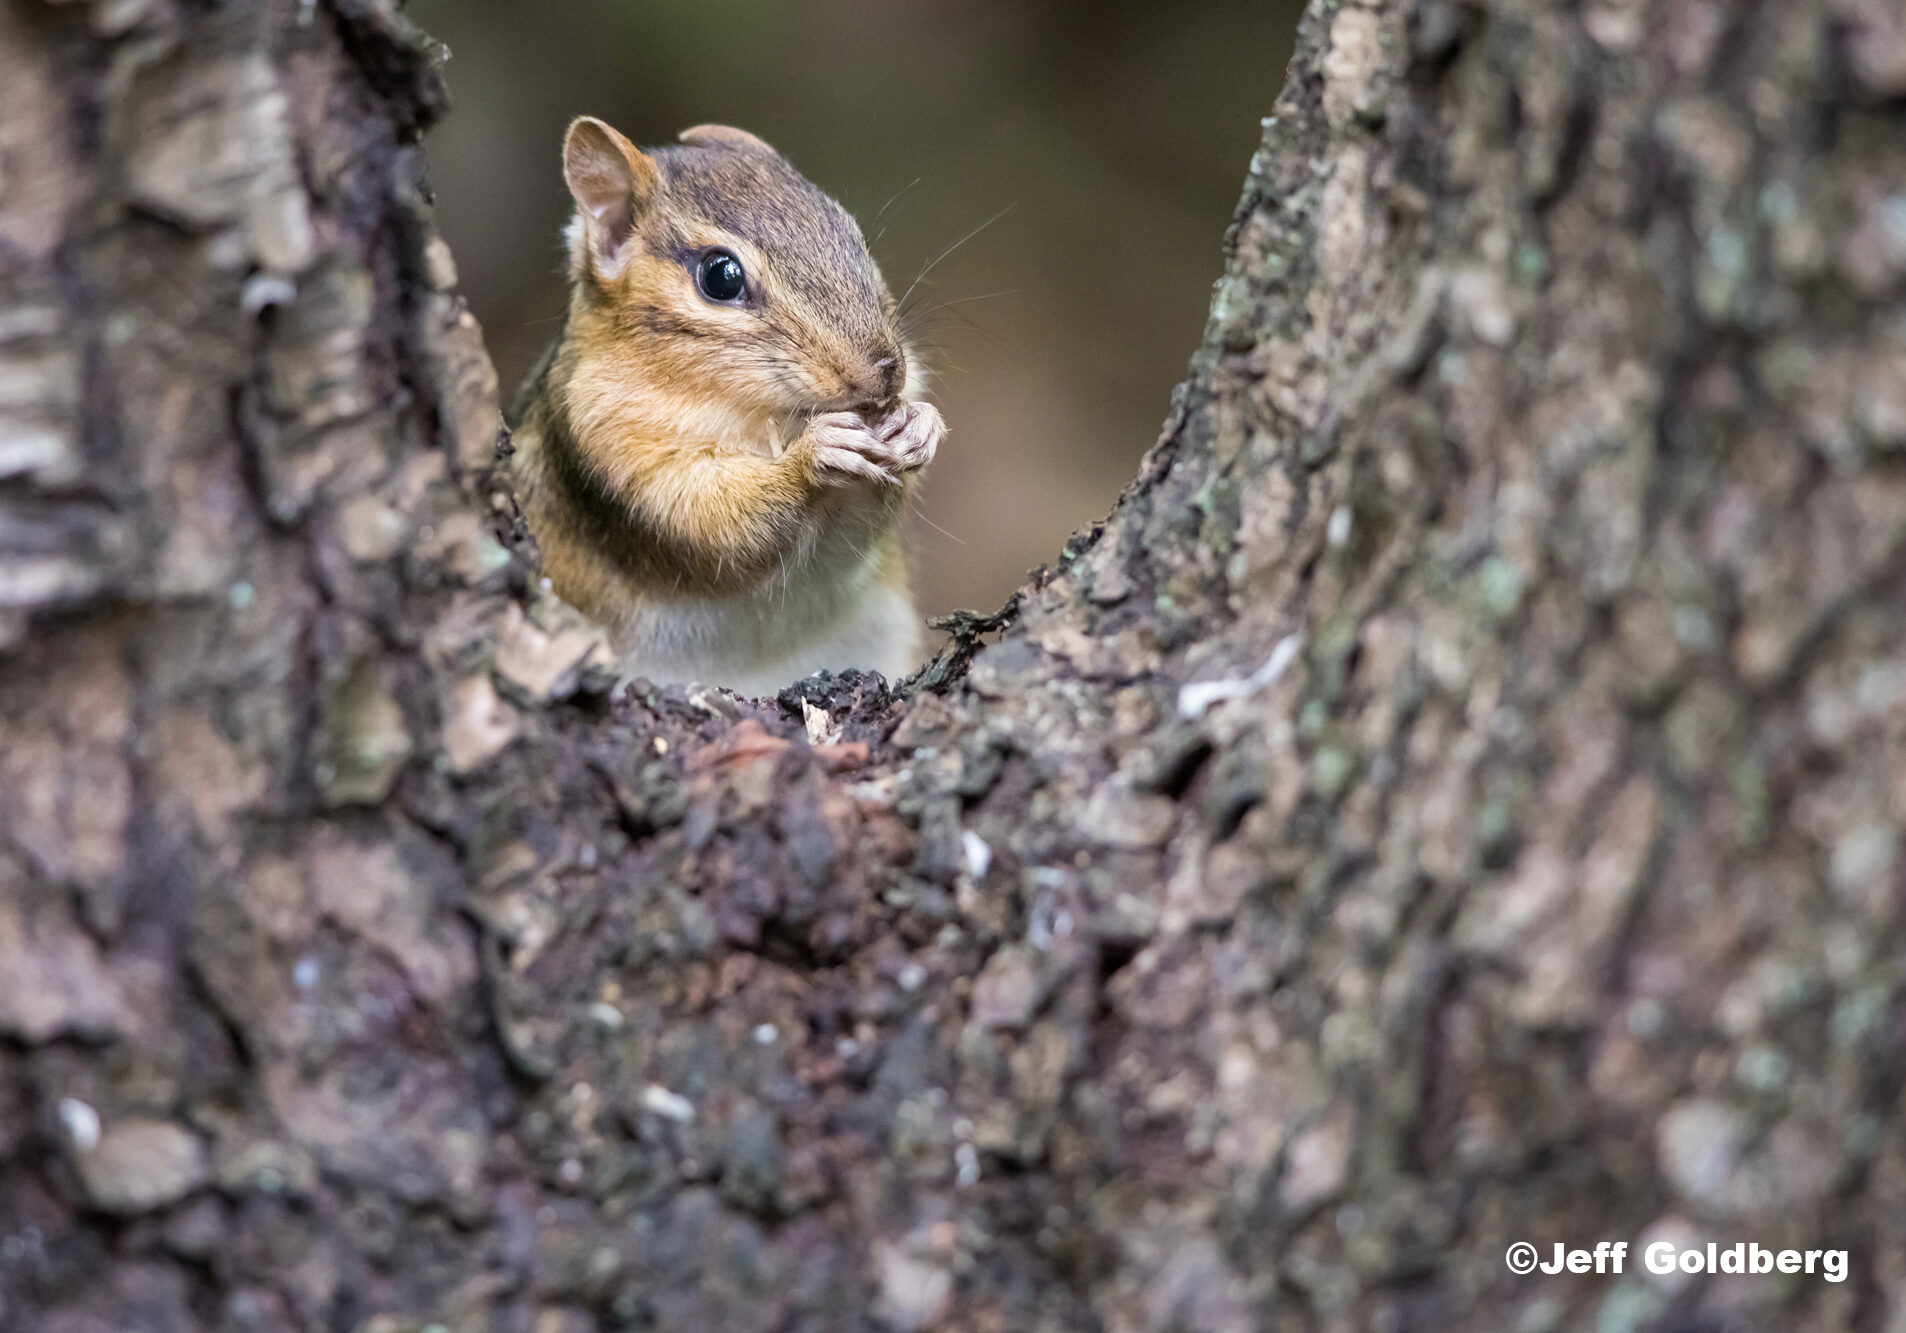 A chipmunk eats in between branches of the tree